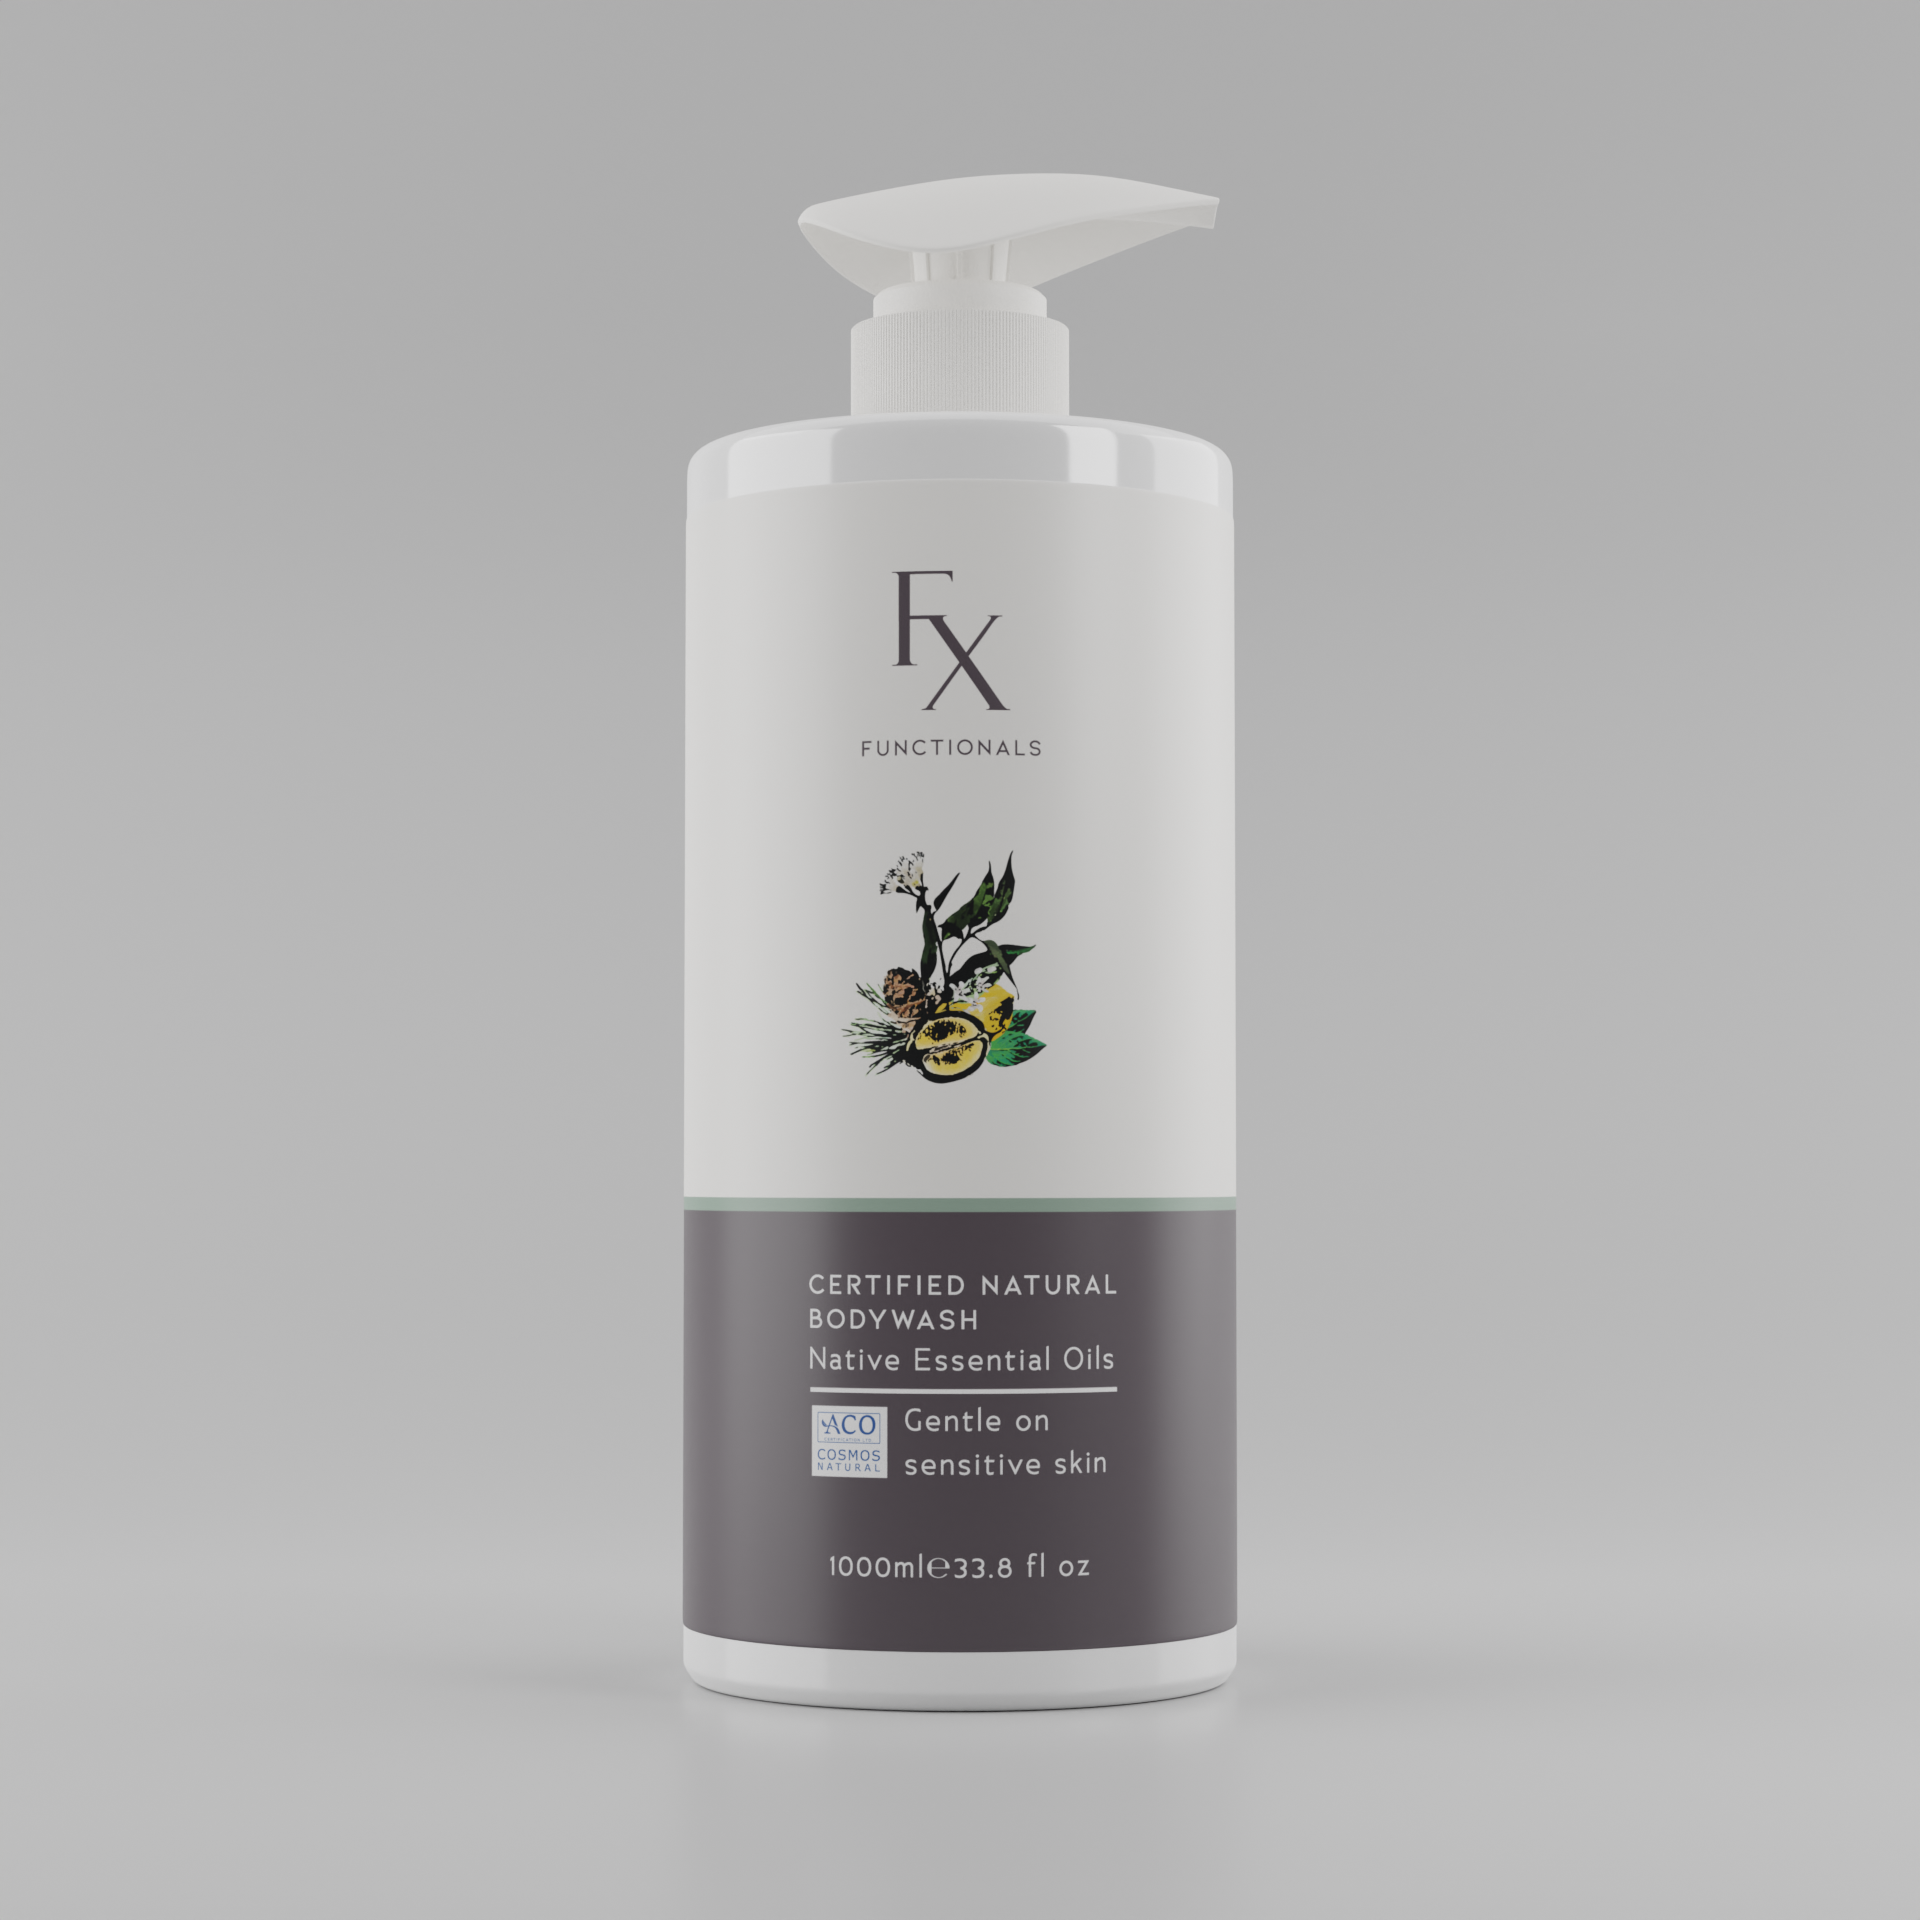 Certified Natural Bodywash with Australian native essential oils on grey background